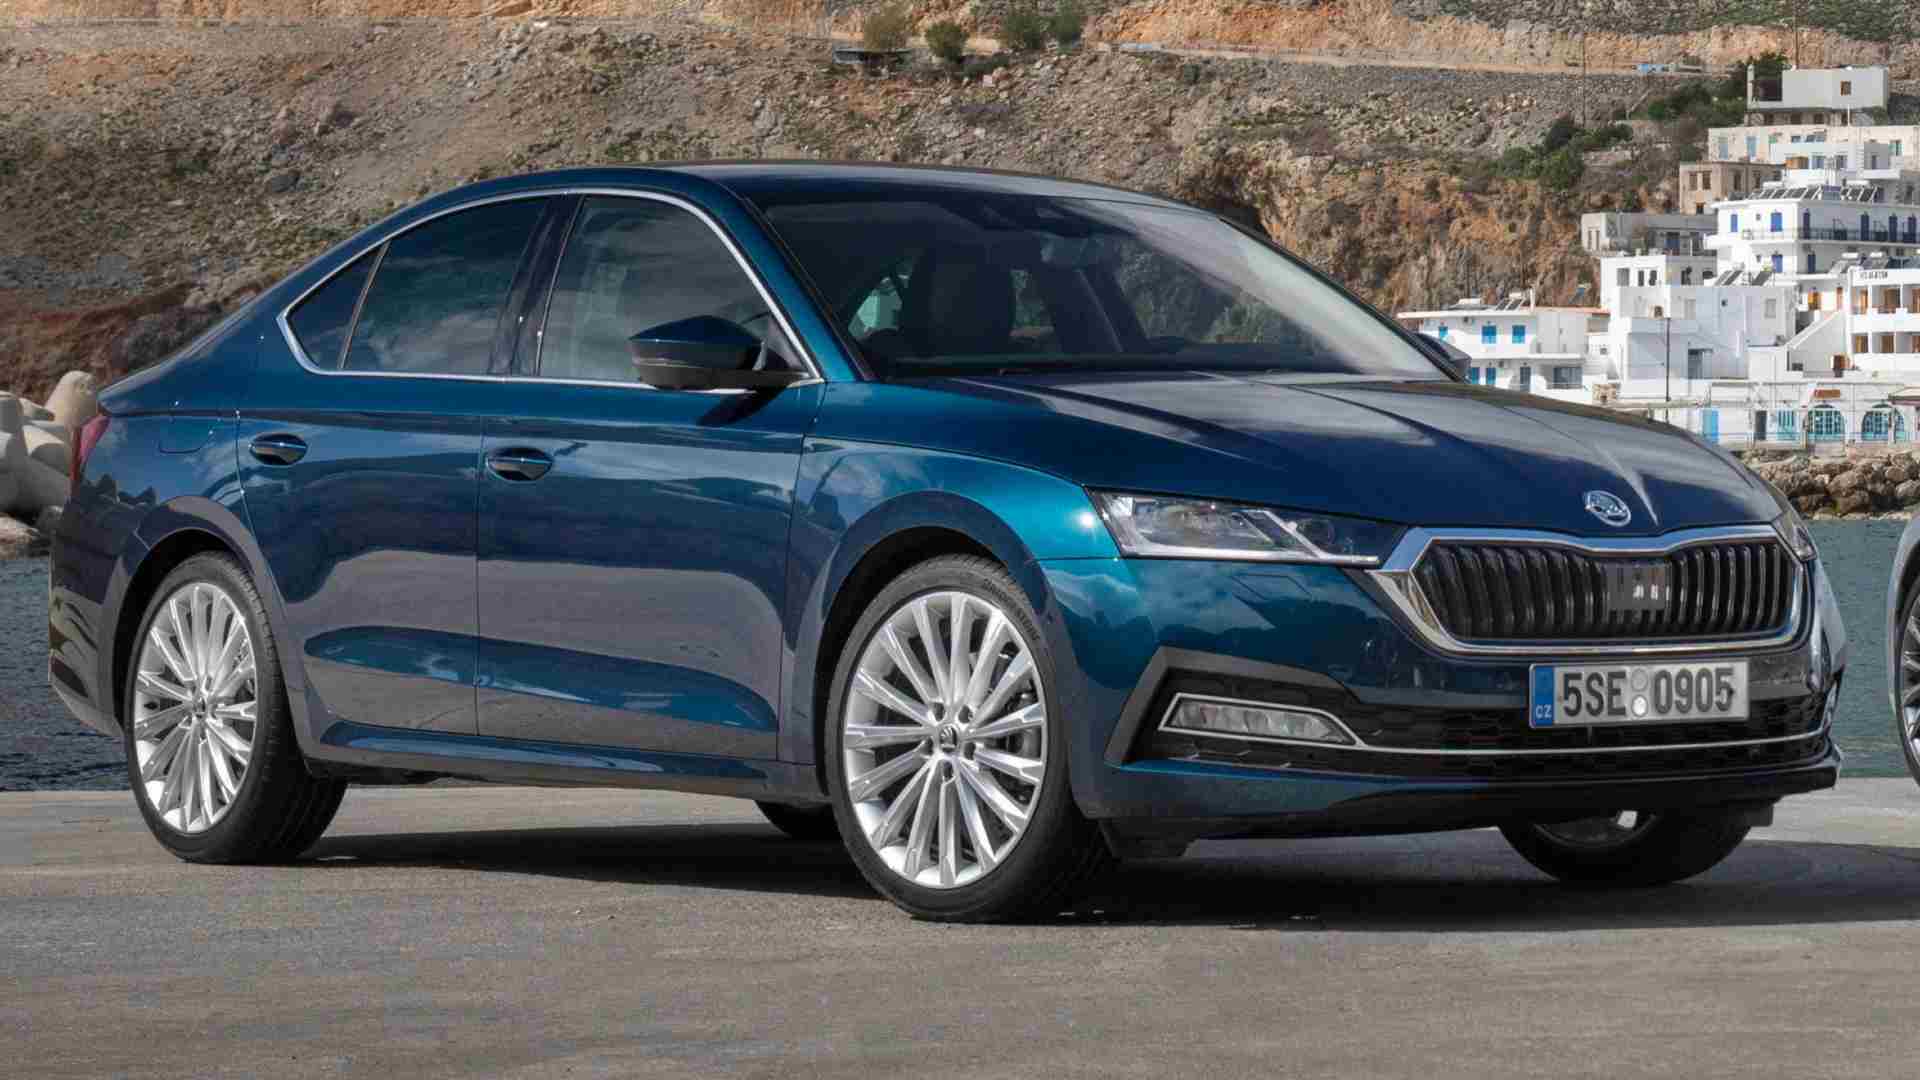 New Skoda Octavia India Launch Postponed Owing To Nationwide Surge In COVID 19 Cases Technology News, Firstpost